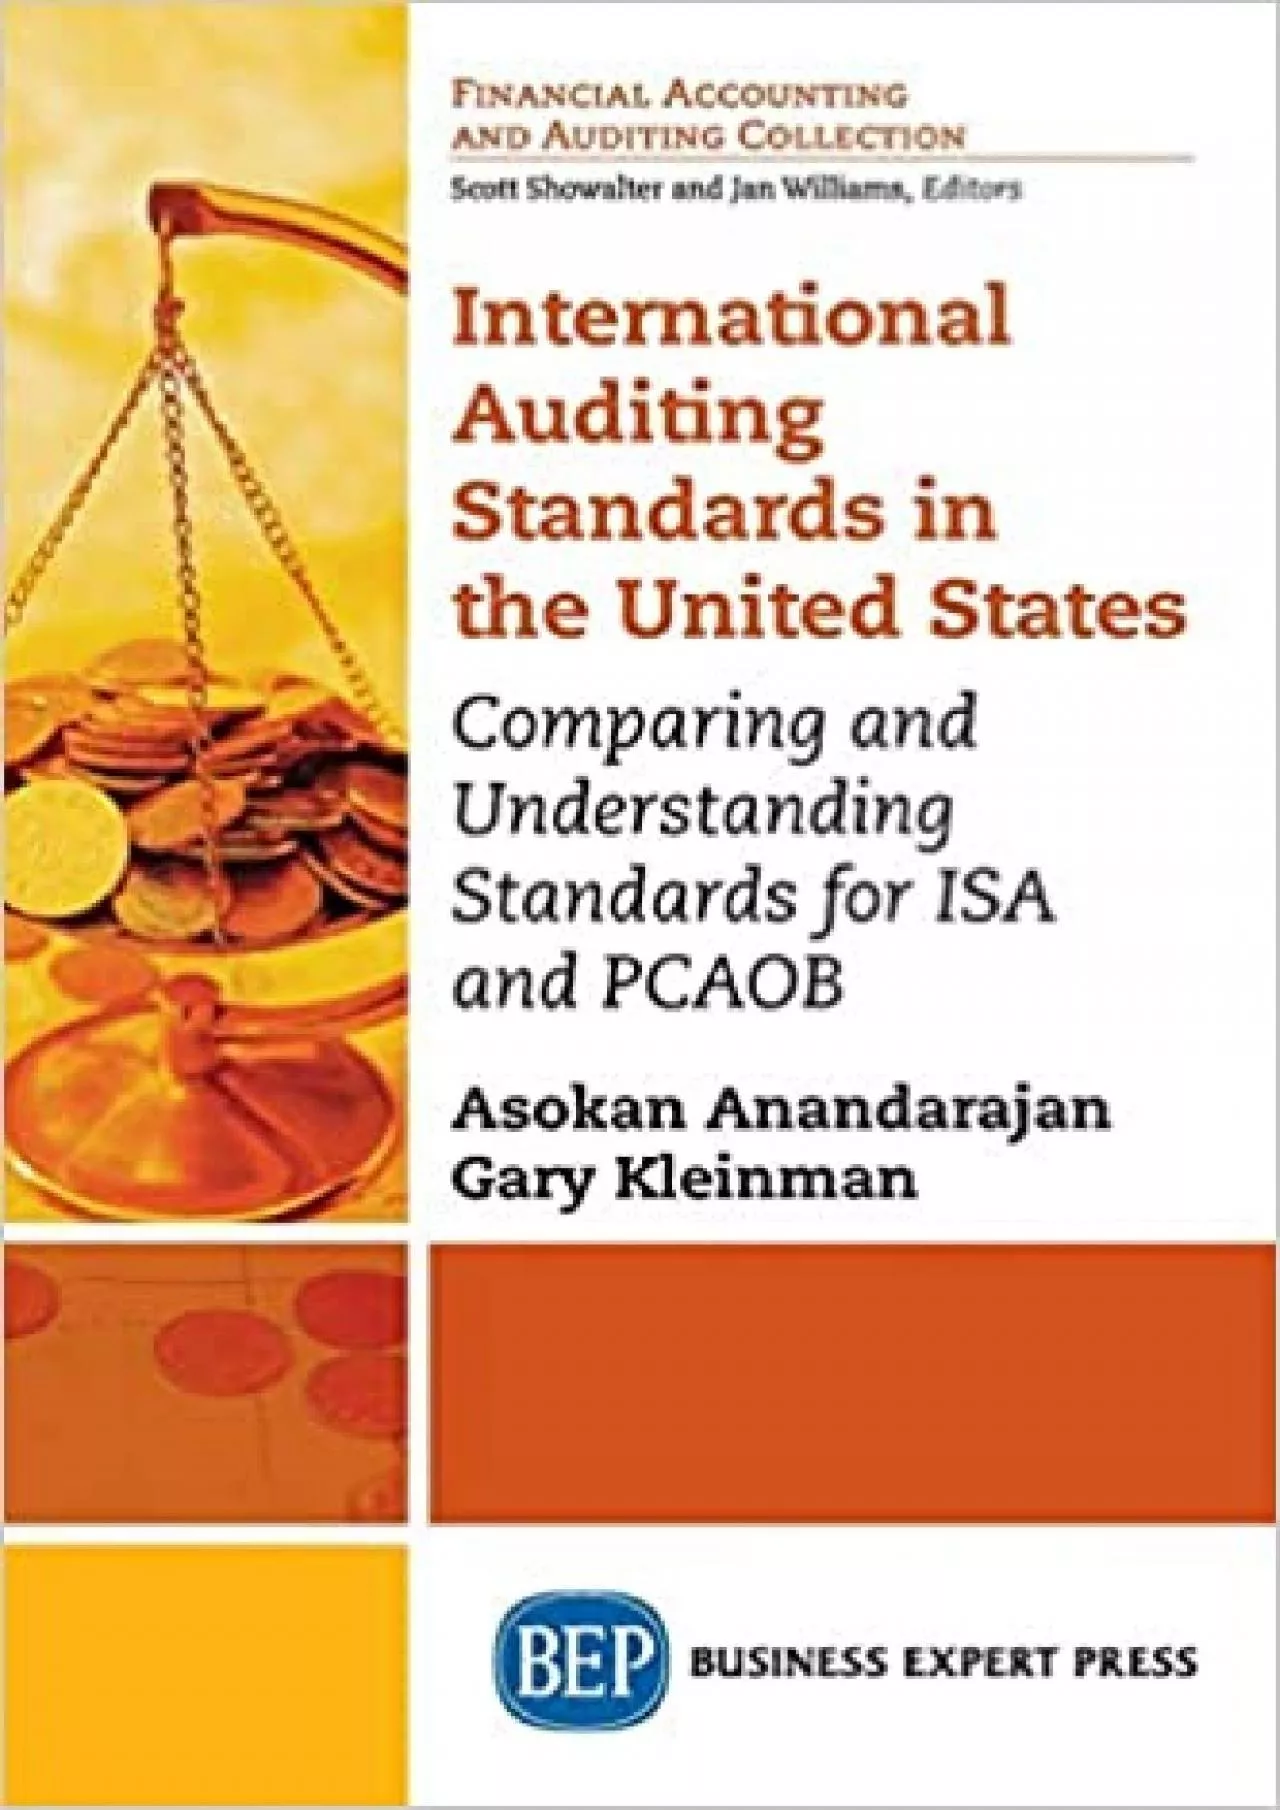 International Auditing Standards in the United States: Comparing and Understanding Standards